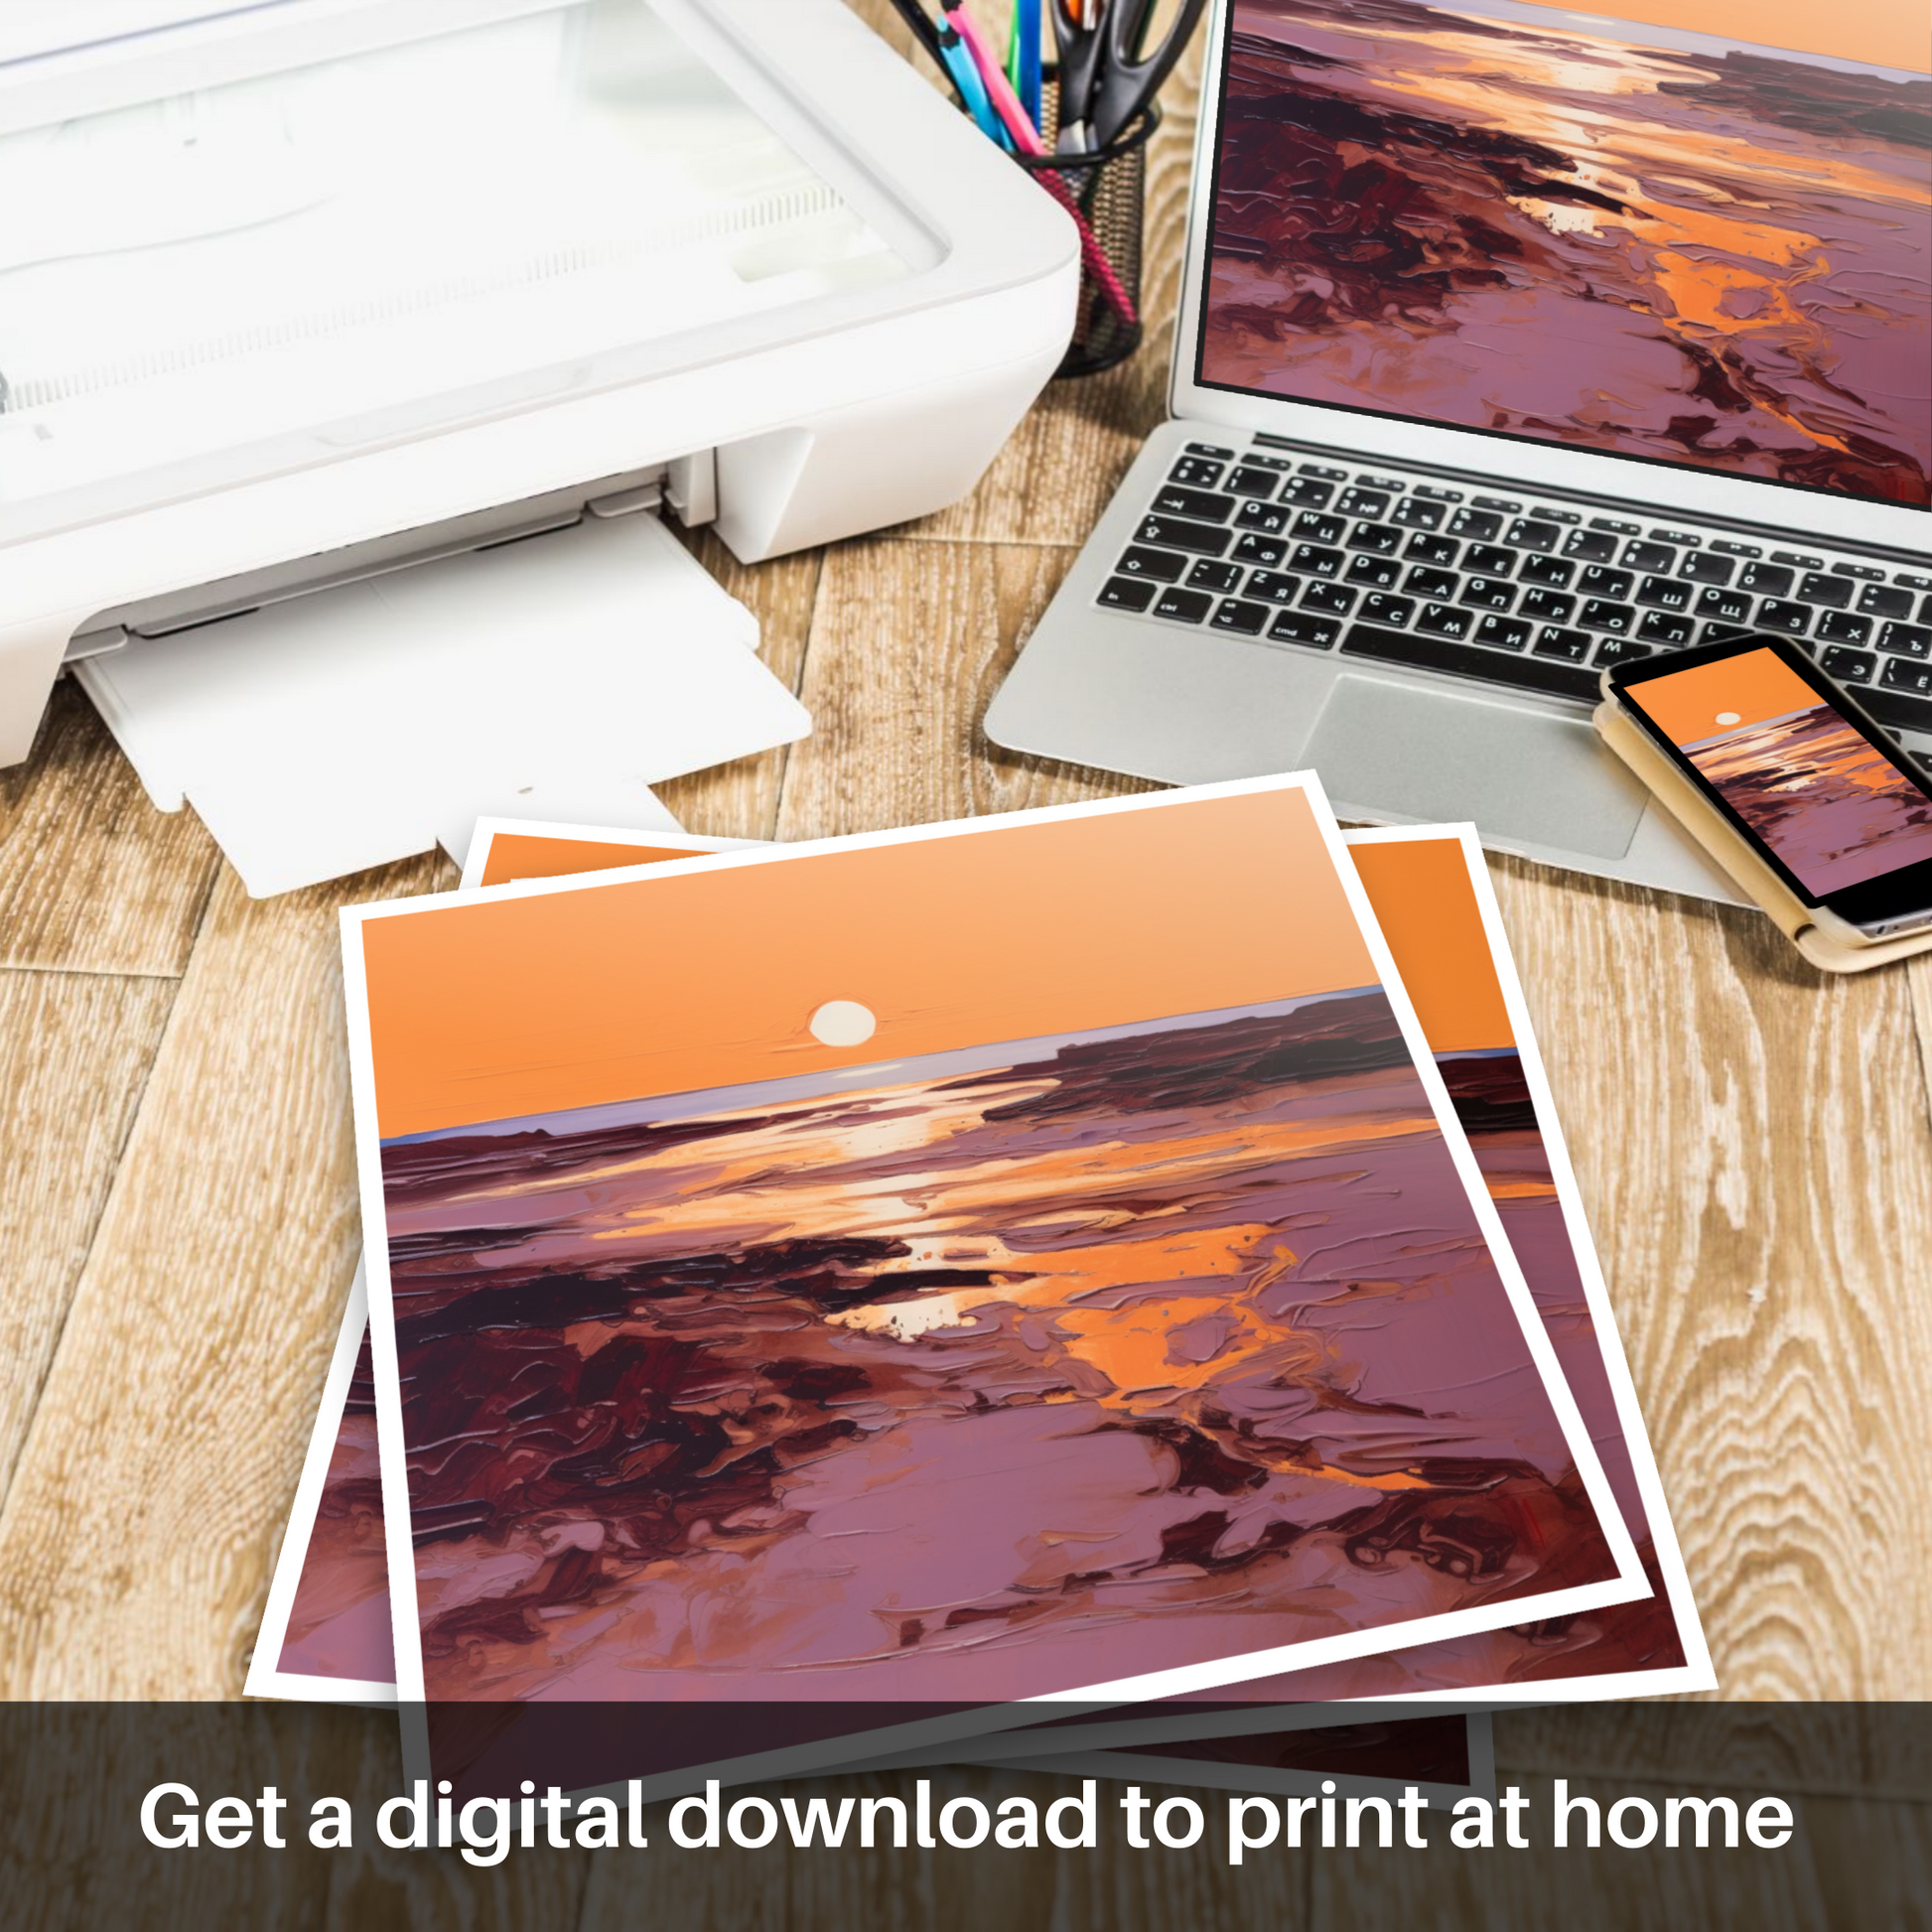 Downloadable and printable picture of Balmedie Beach at golden hour